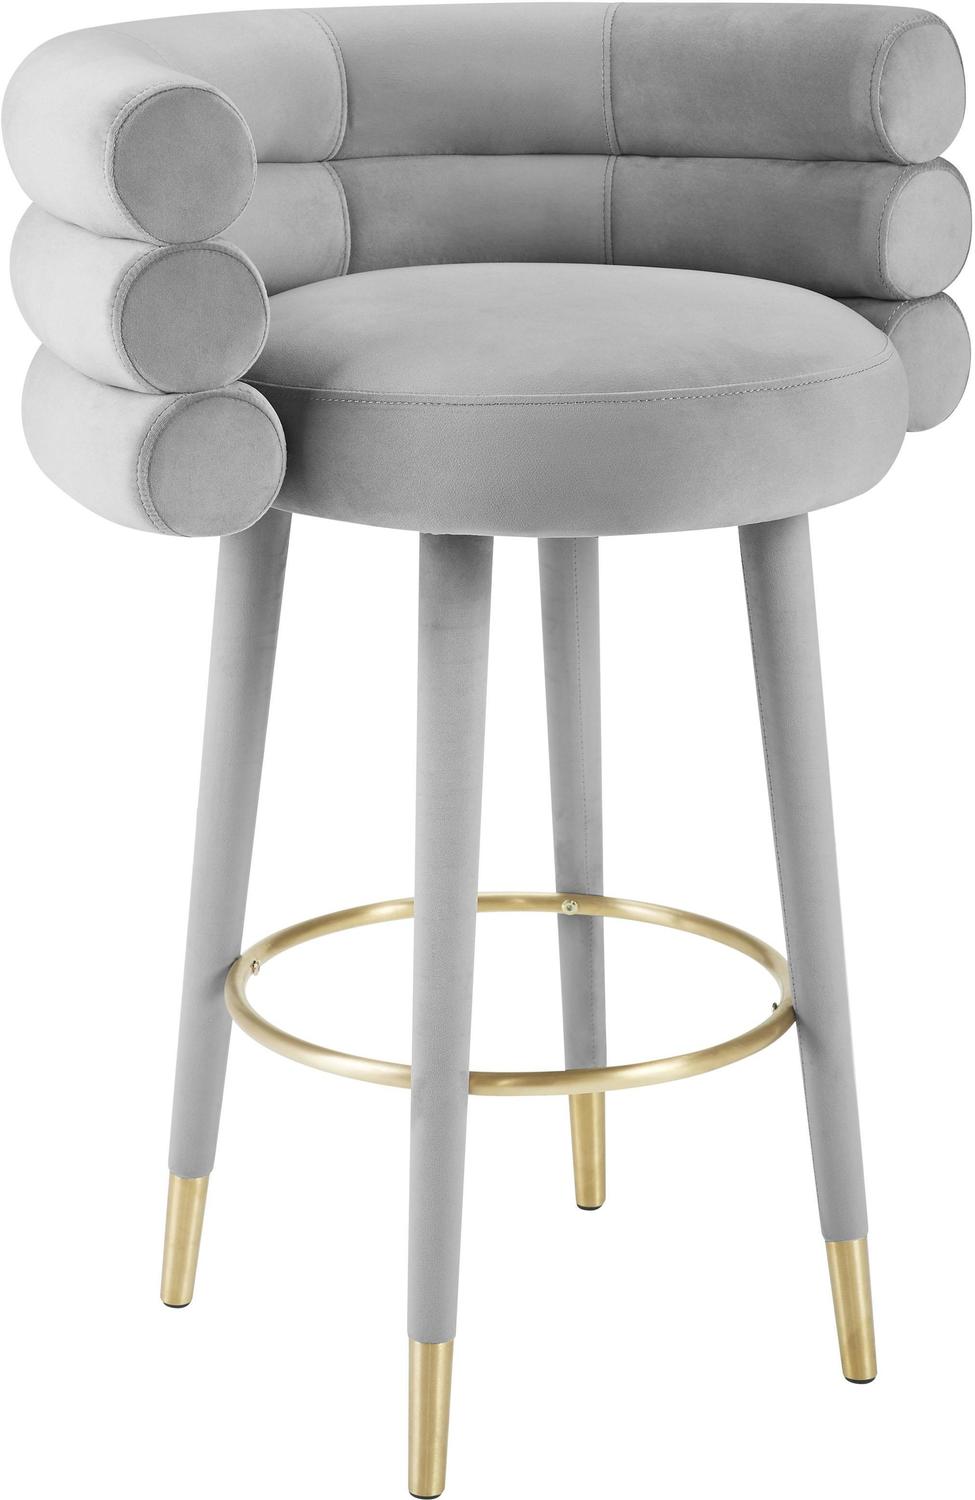 leather stools with backs Tov Furniture Stools Grey